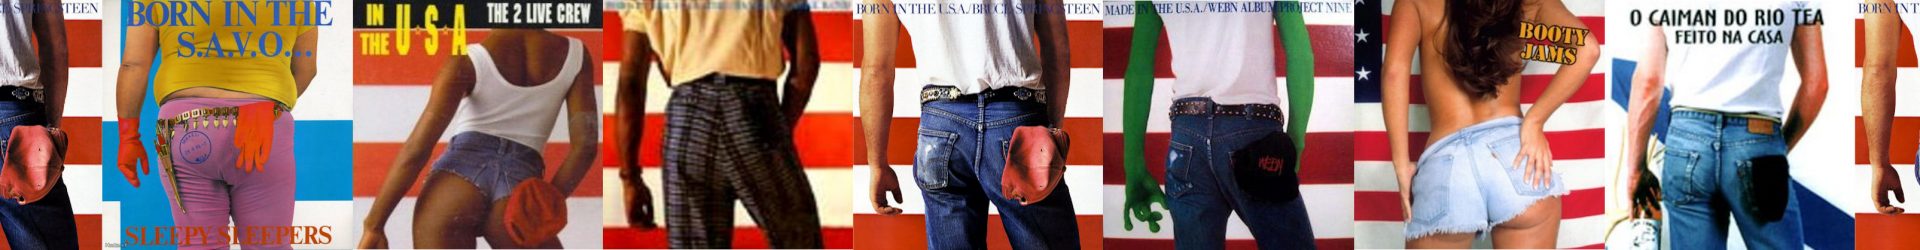 GODLEY & CREME: An Englishman in New York – THE BEACH BOYS: The Little Girl I Once Knew